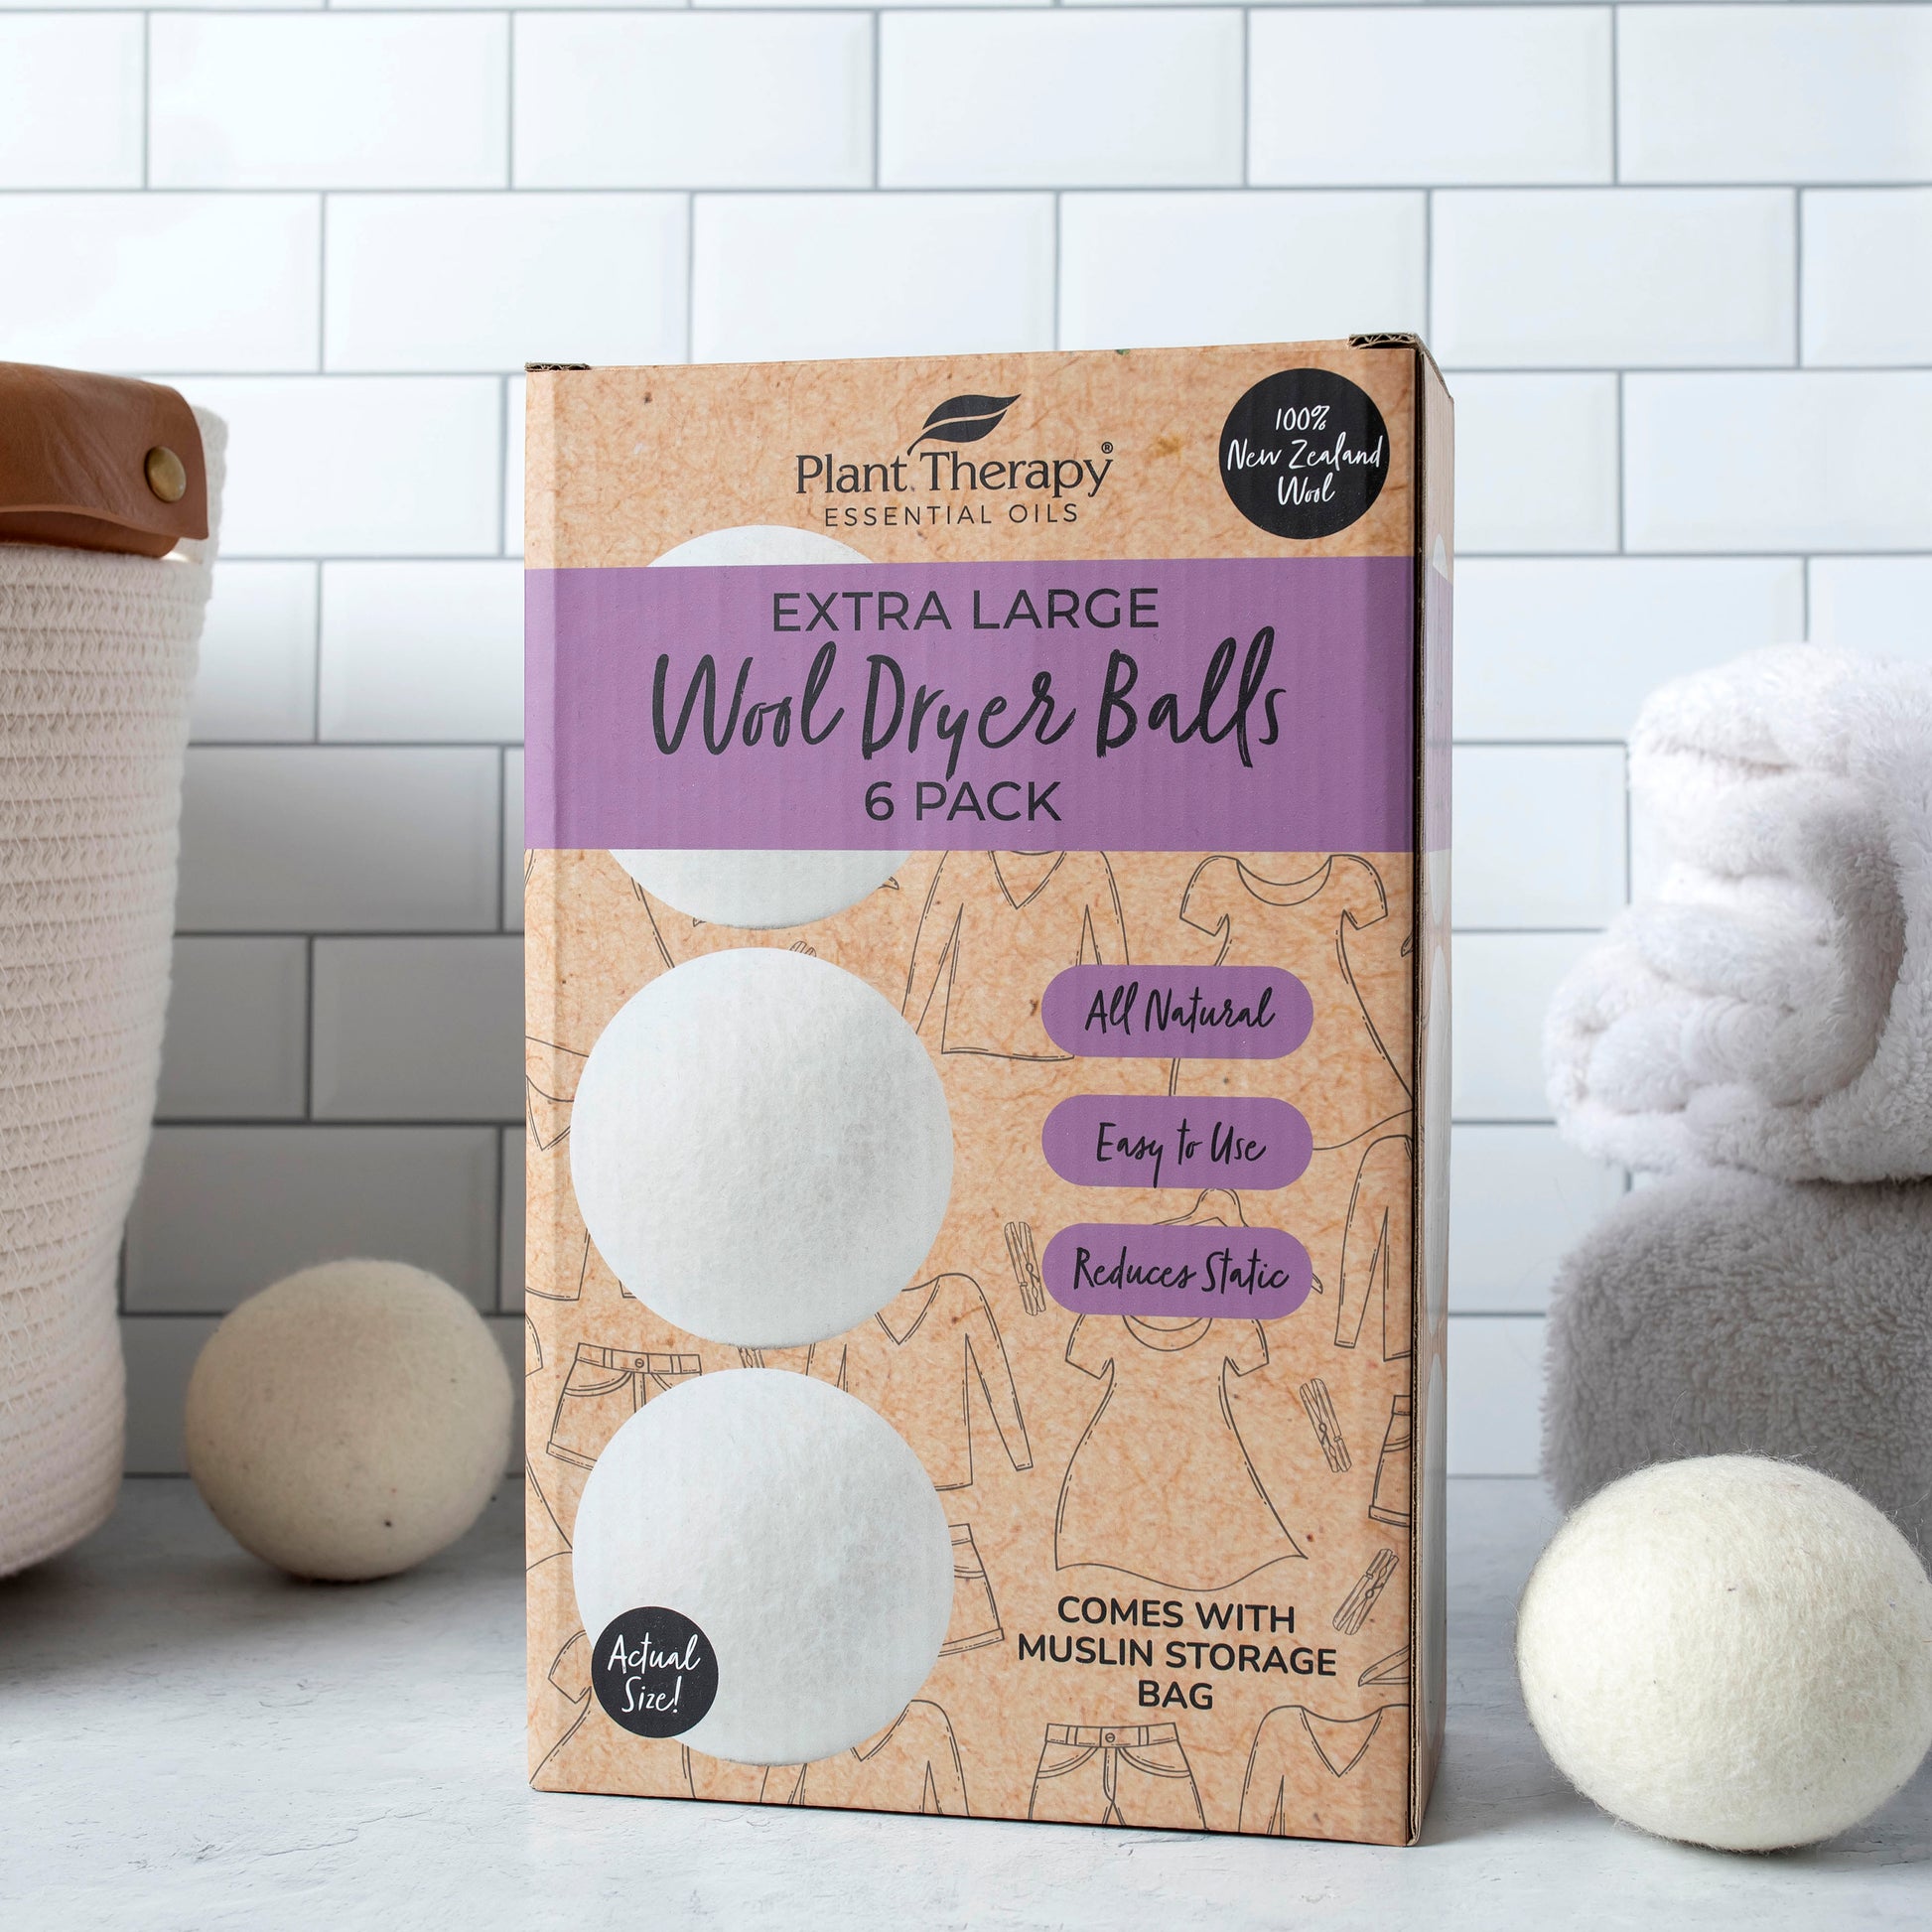 Plant Therapy Wool Dryer Balls 6-Pack 100% New Zealand Wool, Extra Large, Eco-Friendly, Reusable Natural Fabric Softener, All Natural & Chemical Free